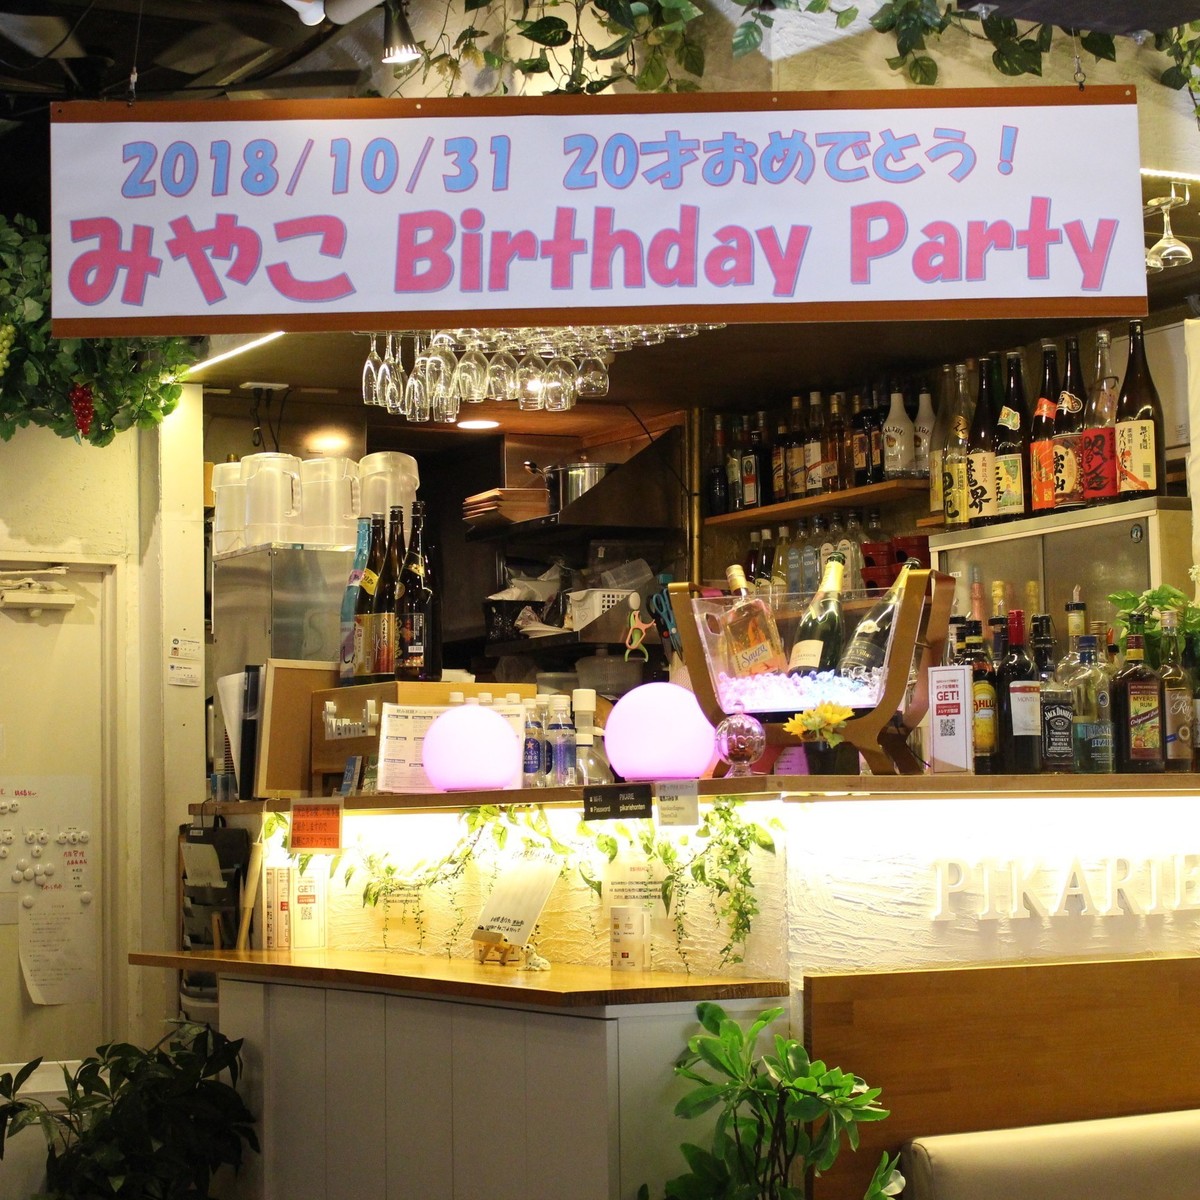 If you want to hold a private party in Shibuya, we recommend Shibuya Picarie Main Store! Free banner creation service for private parties!